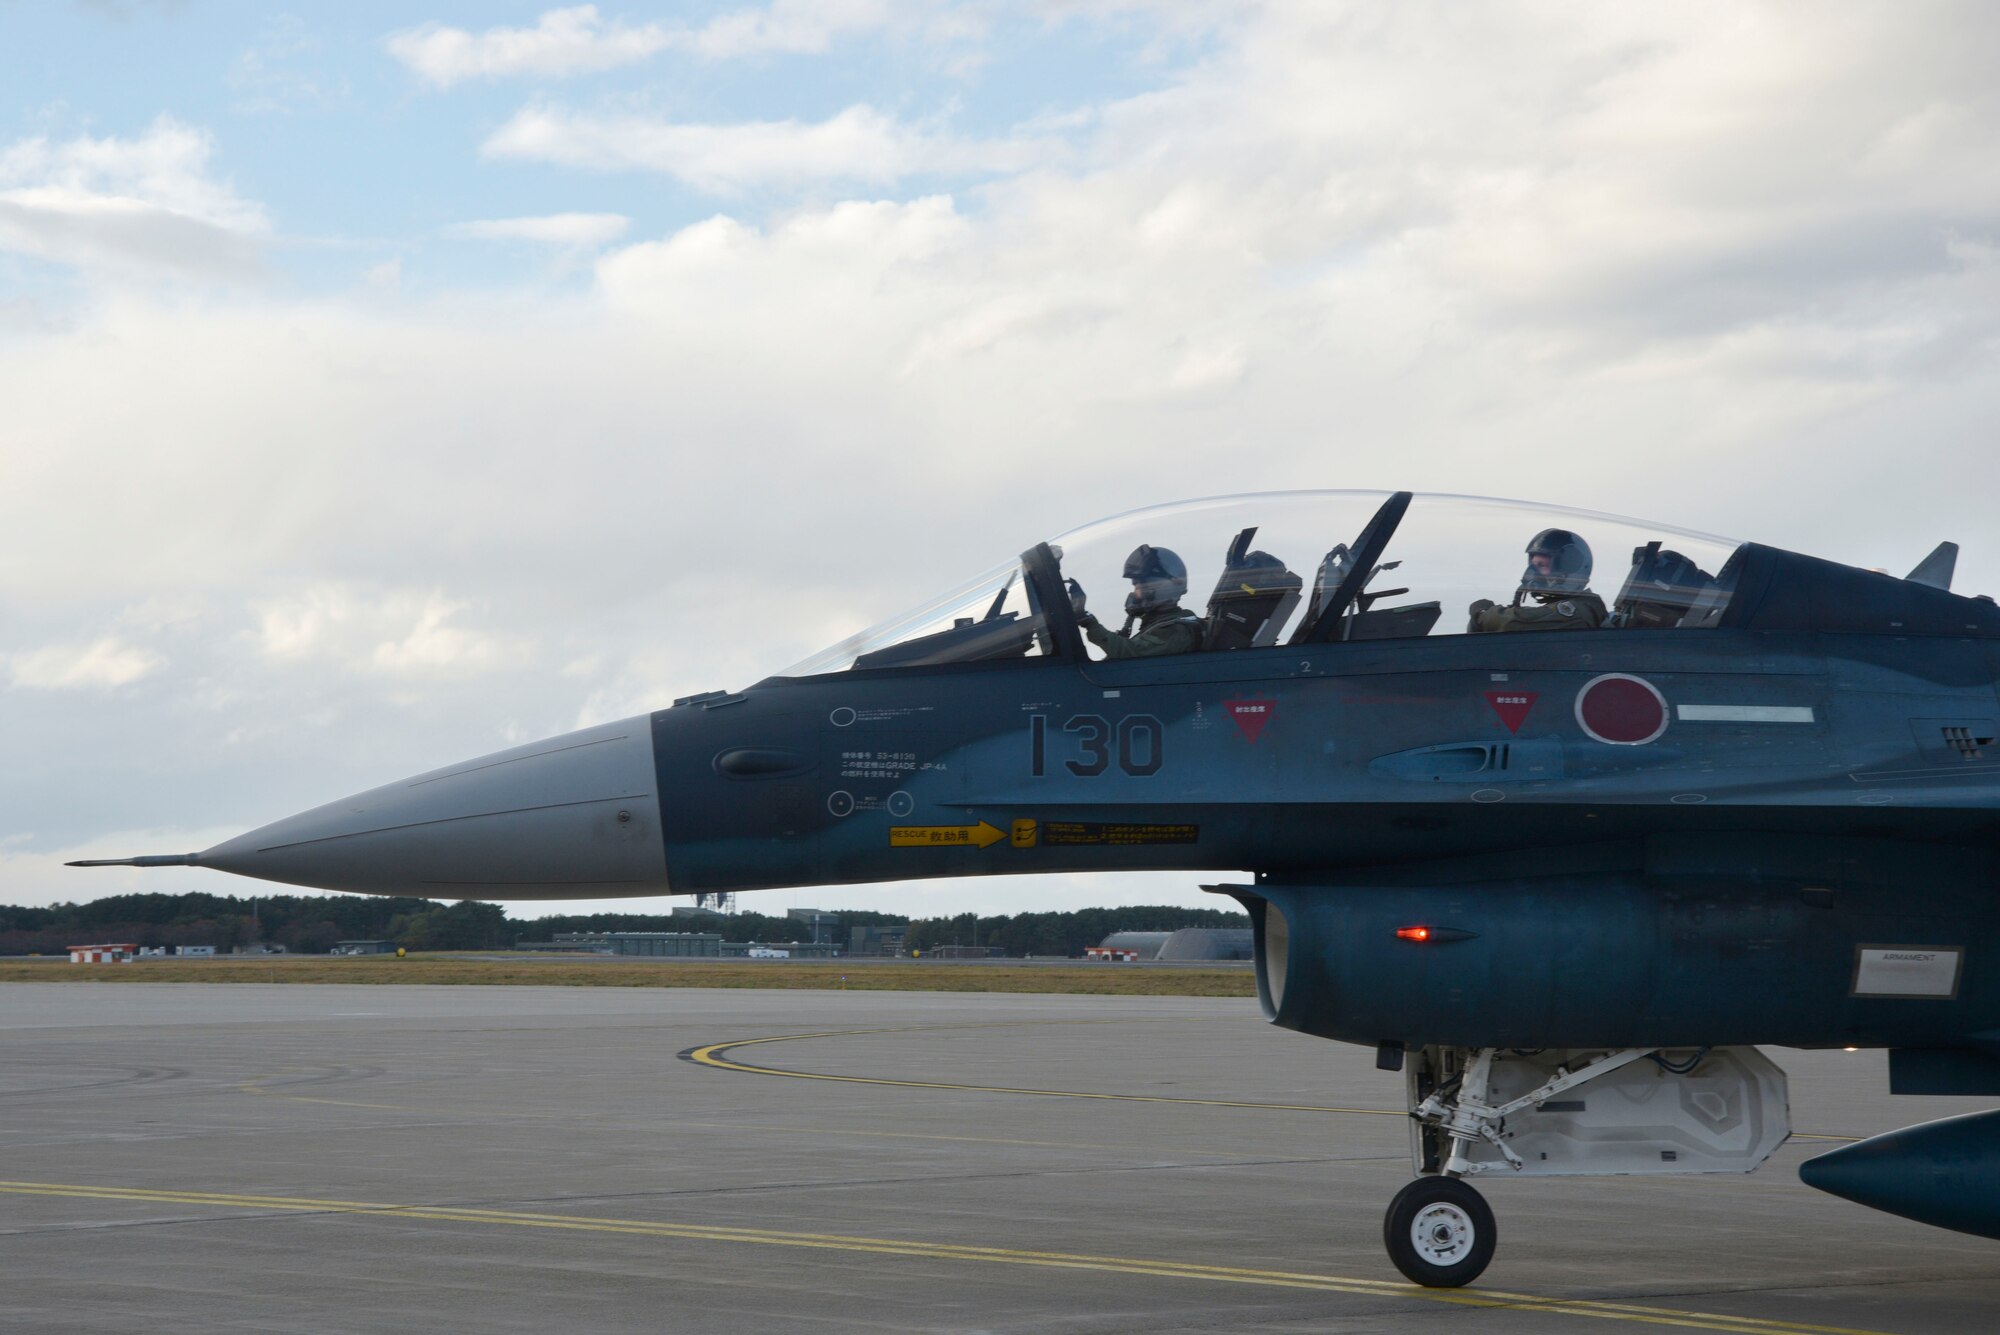 Lt. Gen. John Dolan, the U.S. Forces Japan commander, arrives in a Mitsubishi F-2 at Misawa Air Base, Japan, Oct. 14, 2015. Dolan had the opportunity to visit with the Japan Air Self-Defense Force’s 3rd Air Wing and fly in the F-2 alongside a JASDF pilot as part of a bilateral exchange flight. (U.S. Air Force photo/Senior Airman Jose L. Hernandez-Domitilo)